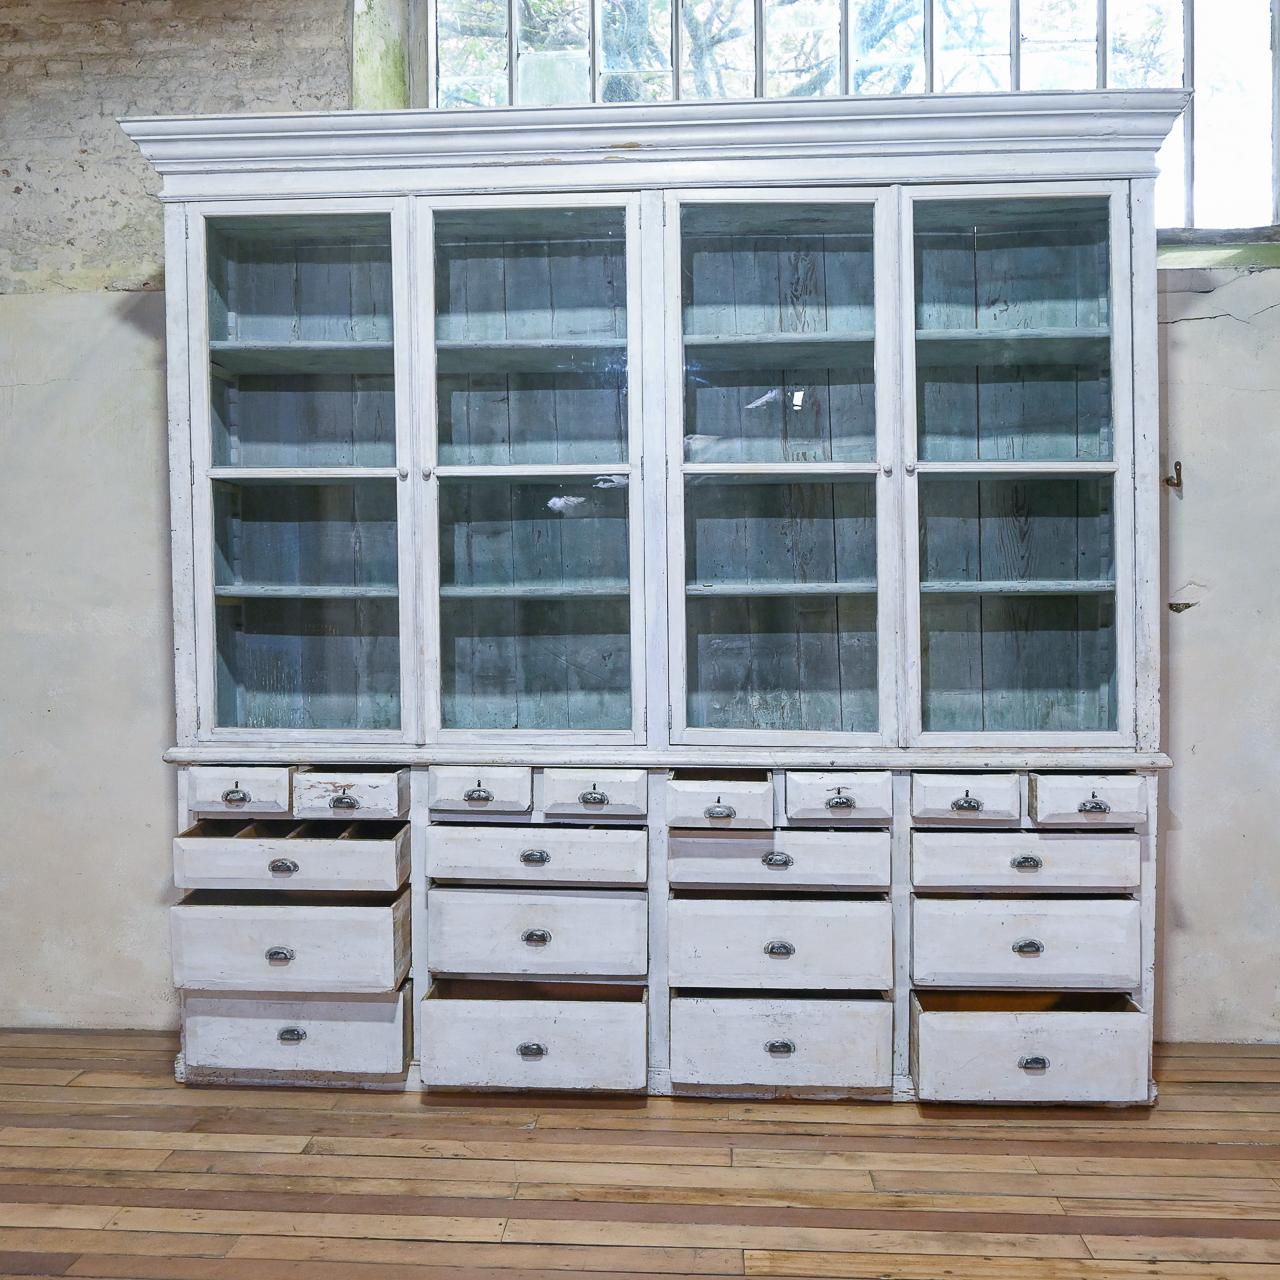 A Large Scale 19th Century French Painted Glazed Bibliothèque Cabinet - Bookcase For Sale 15